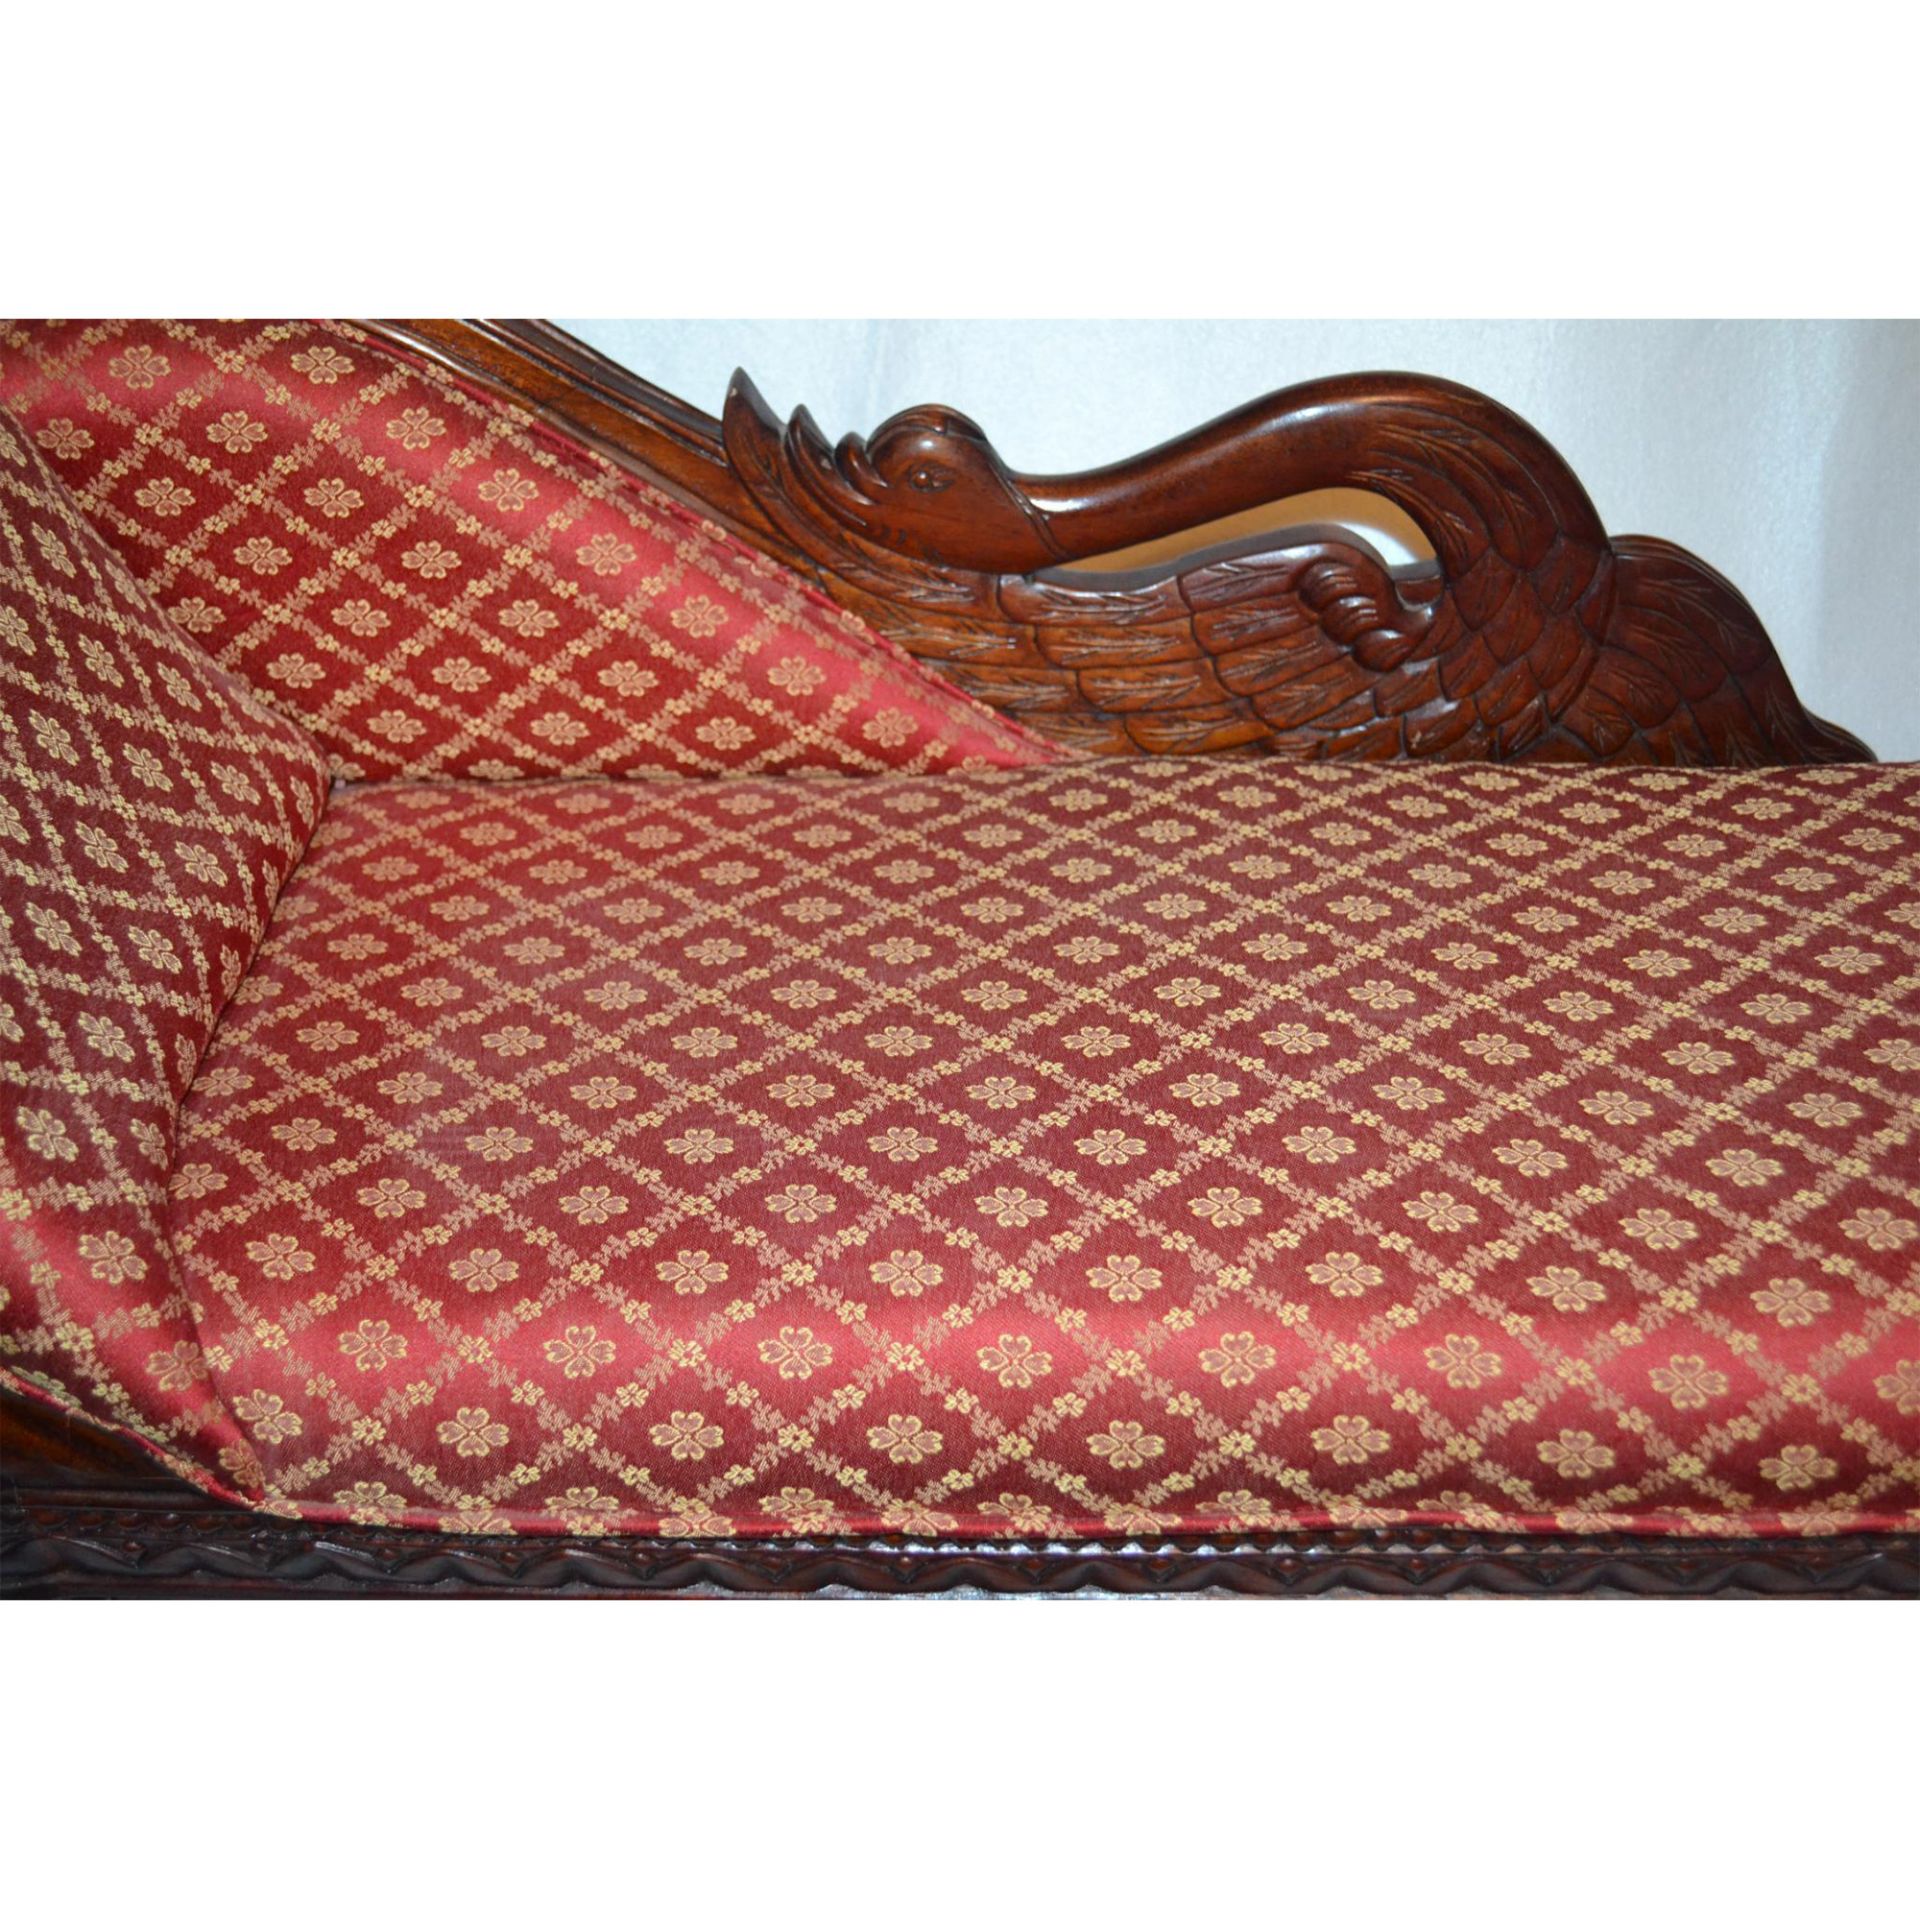 Miniature European Mahogany Hand Carved And Crafted Swan Sofa, Upholstered In Red/Gold Pattern Damas - Image 3 of 5